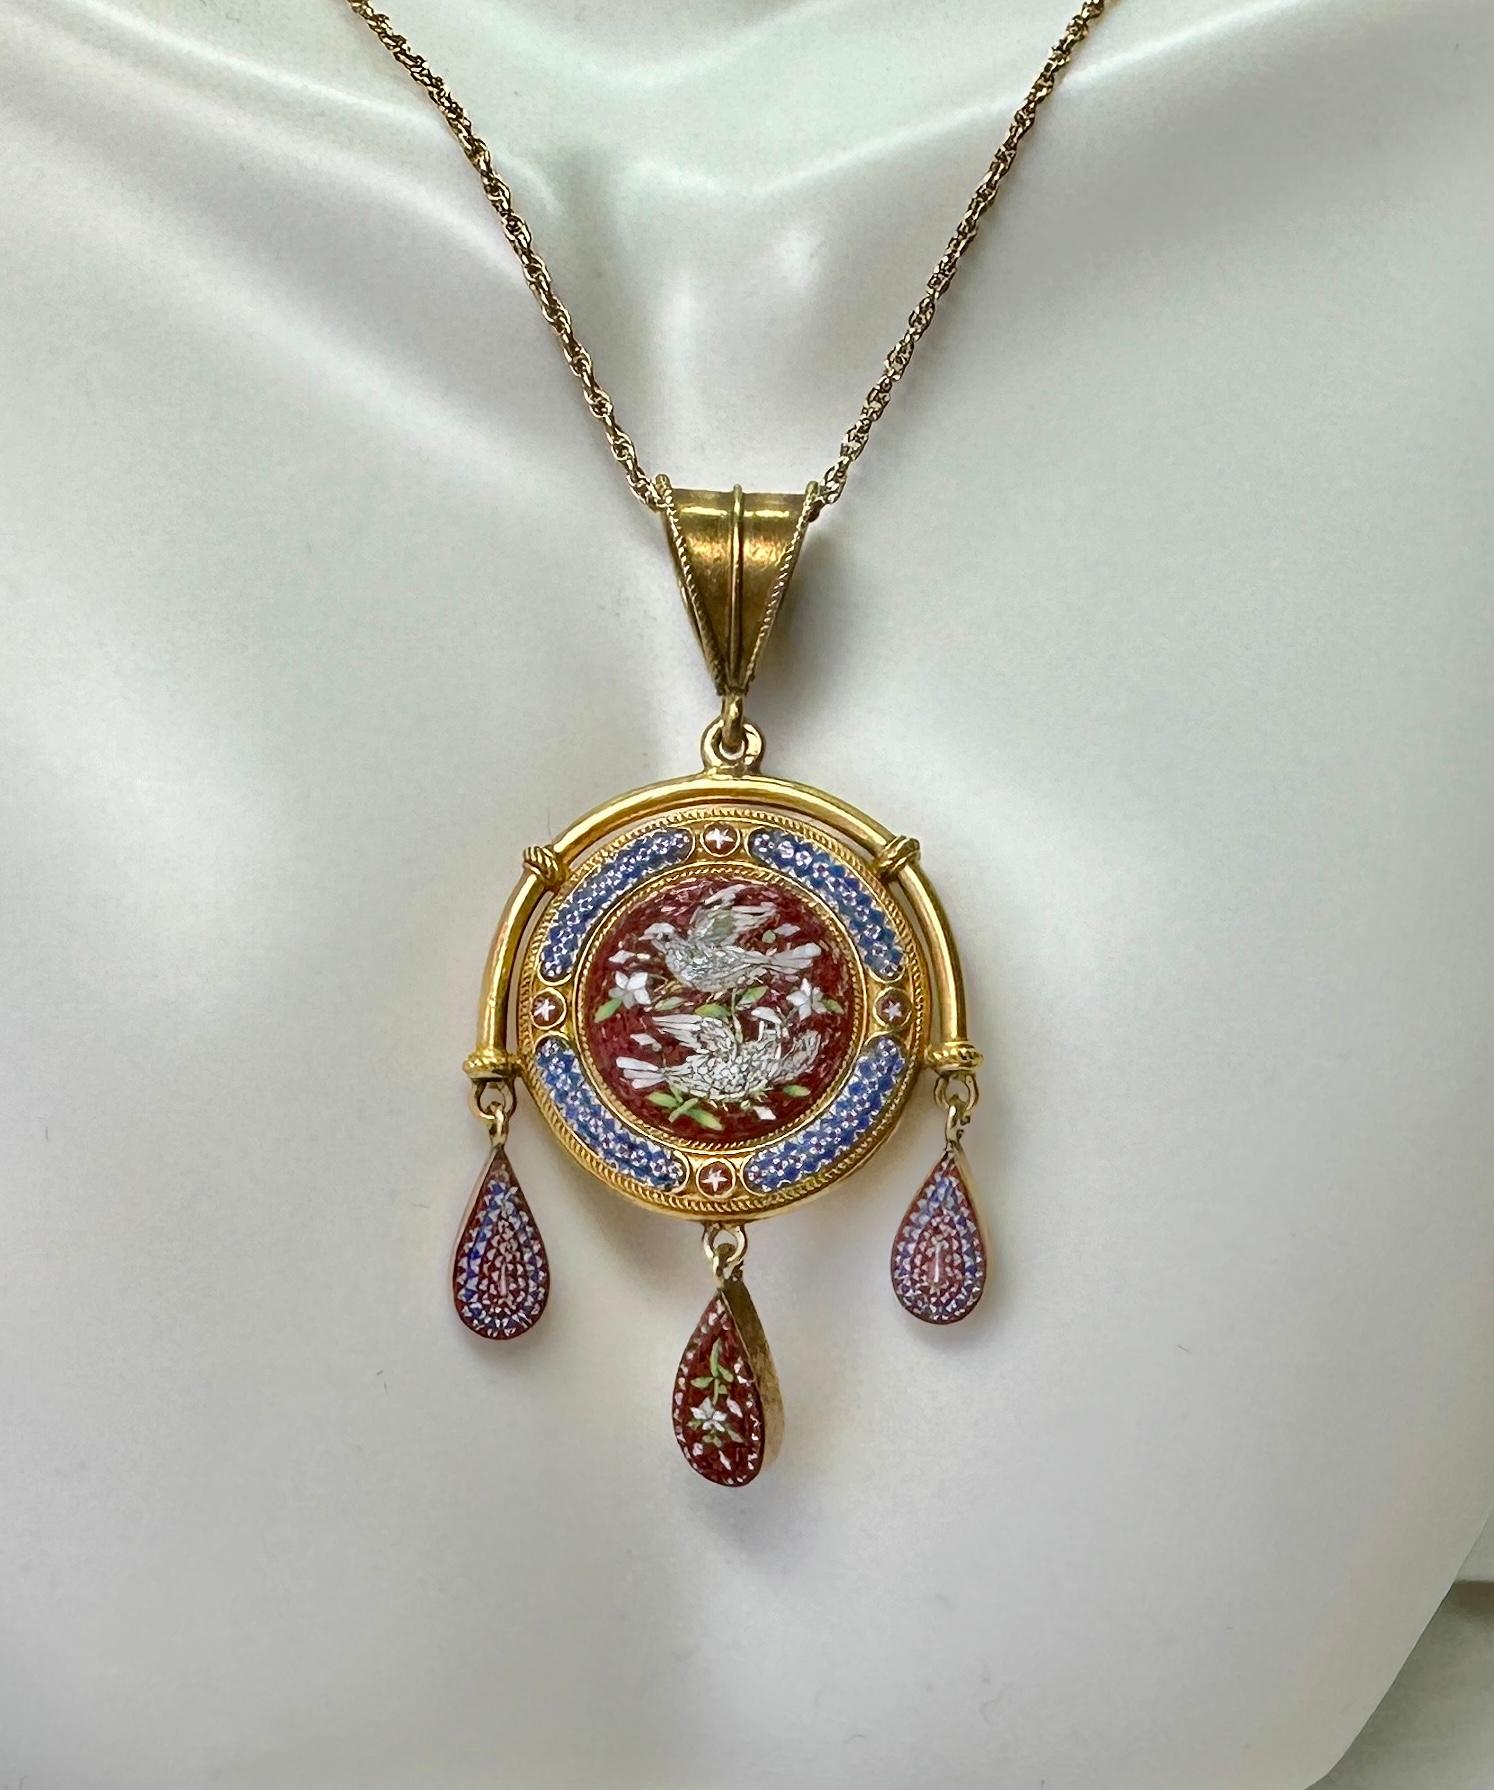 This is a museum quality Antique Micro-mosaic Locket Pendant finely crafted in high carat gold with a magnificent image of two love birds or doves with flowers on a red background in an Etruscan Revival pendant drop design of great beauty.   The